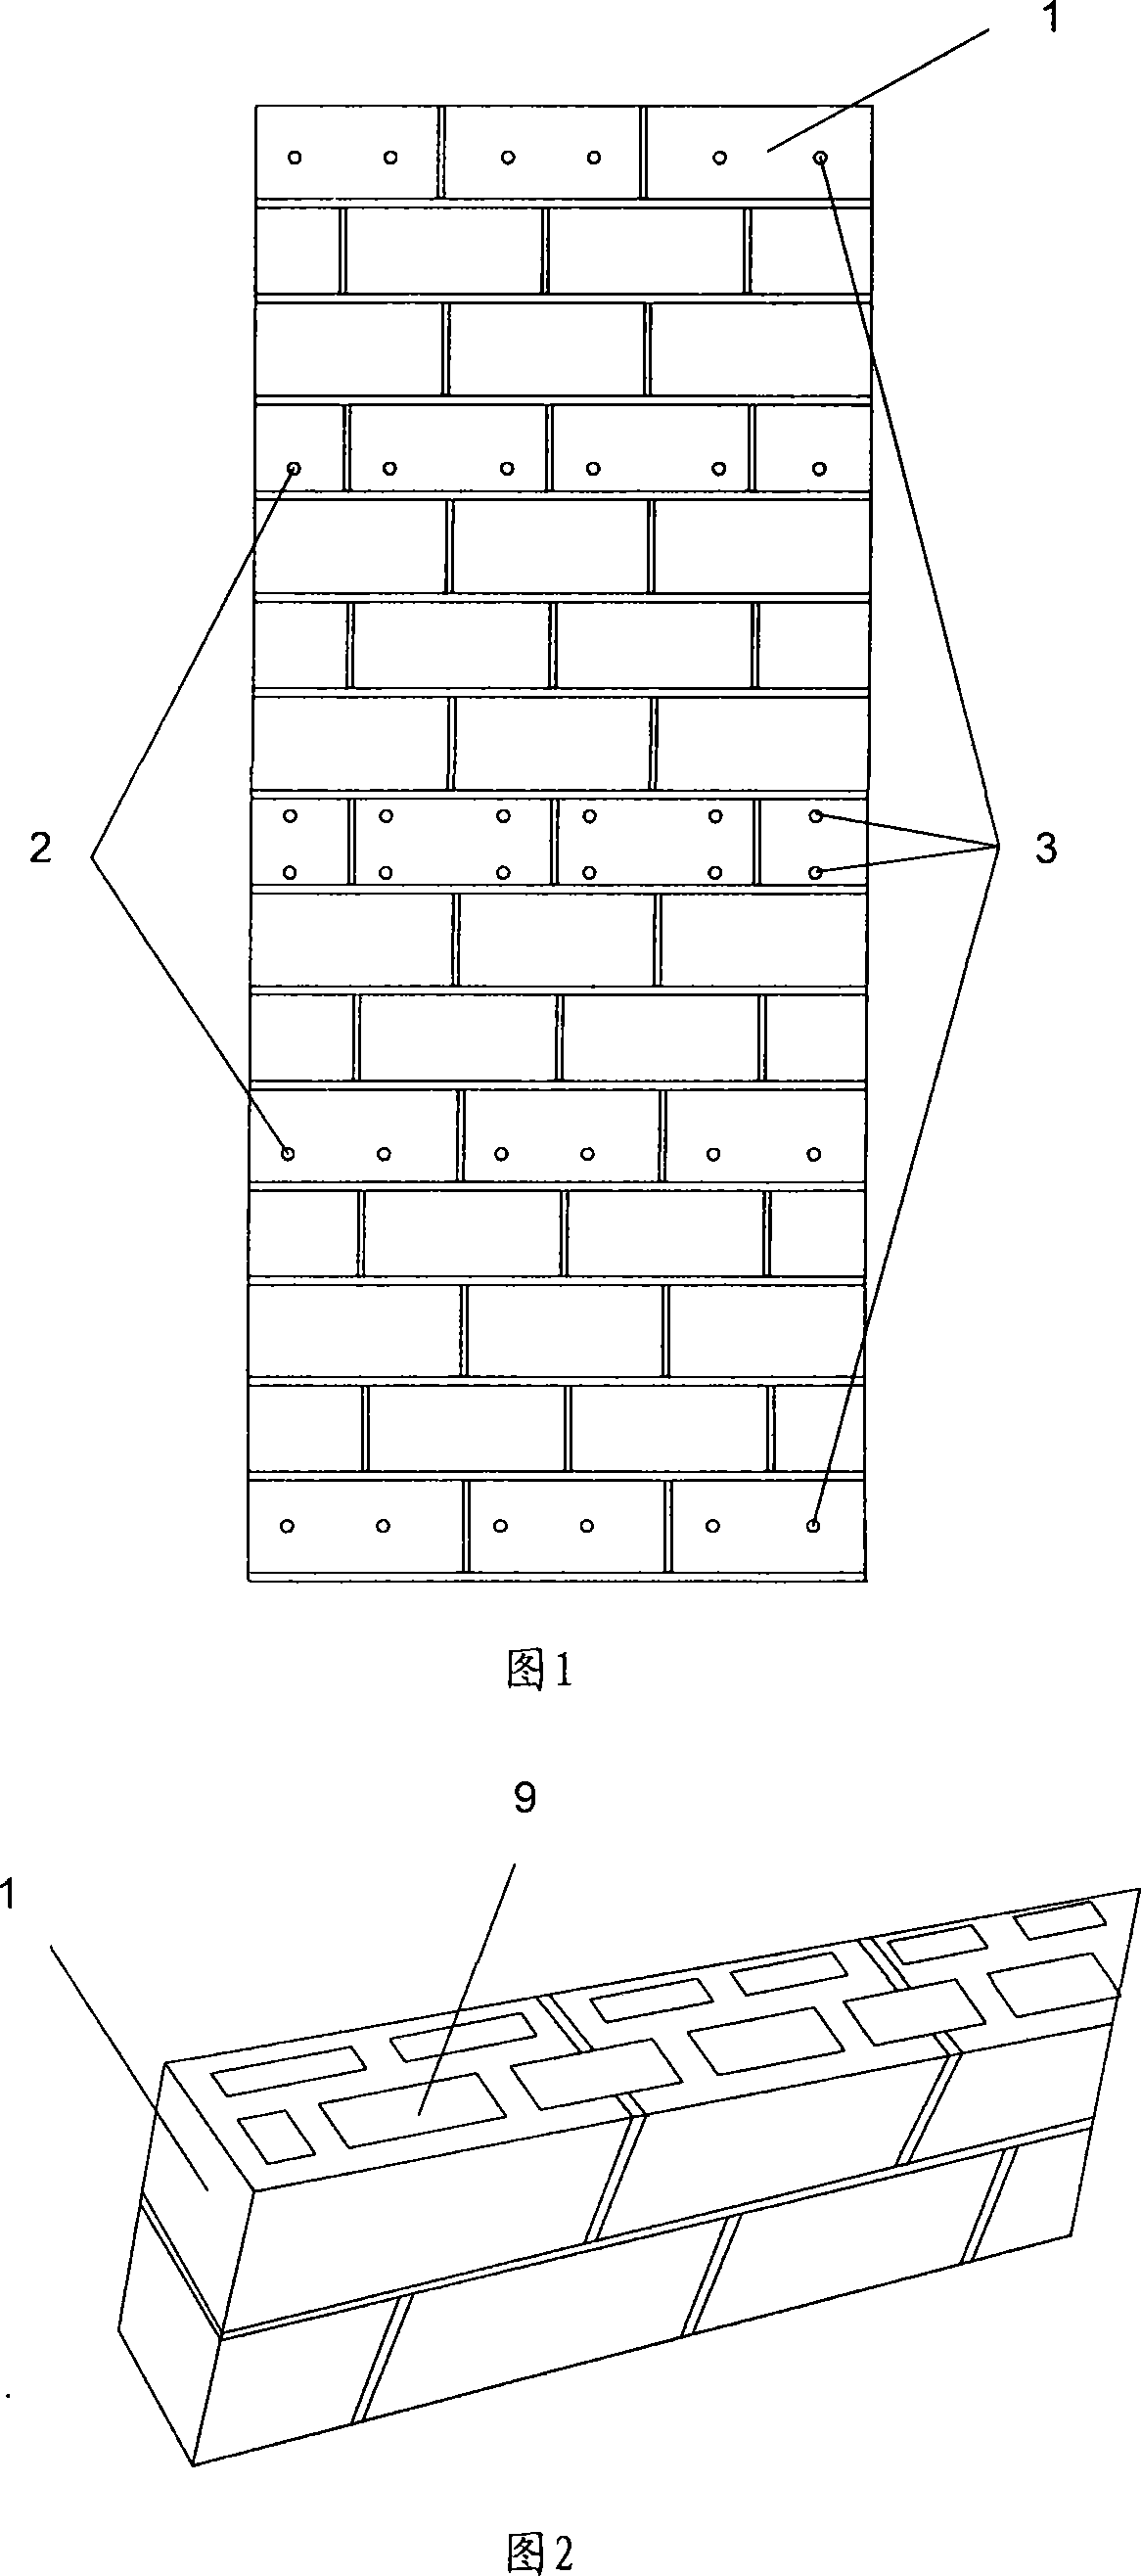 Heat preserving wall foaming in place and construction method